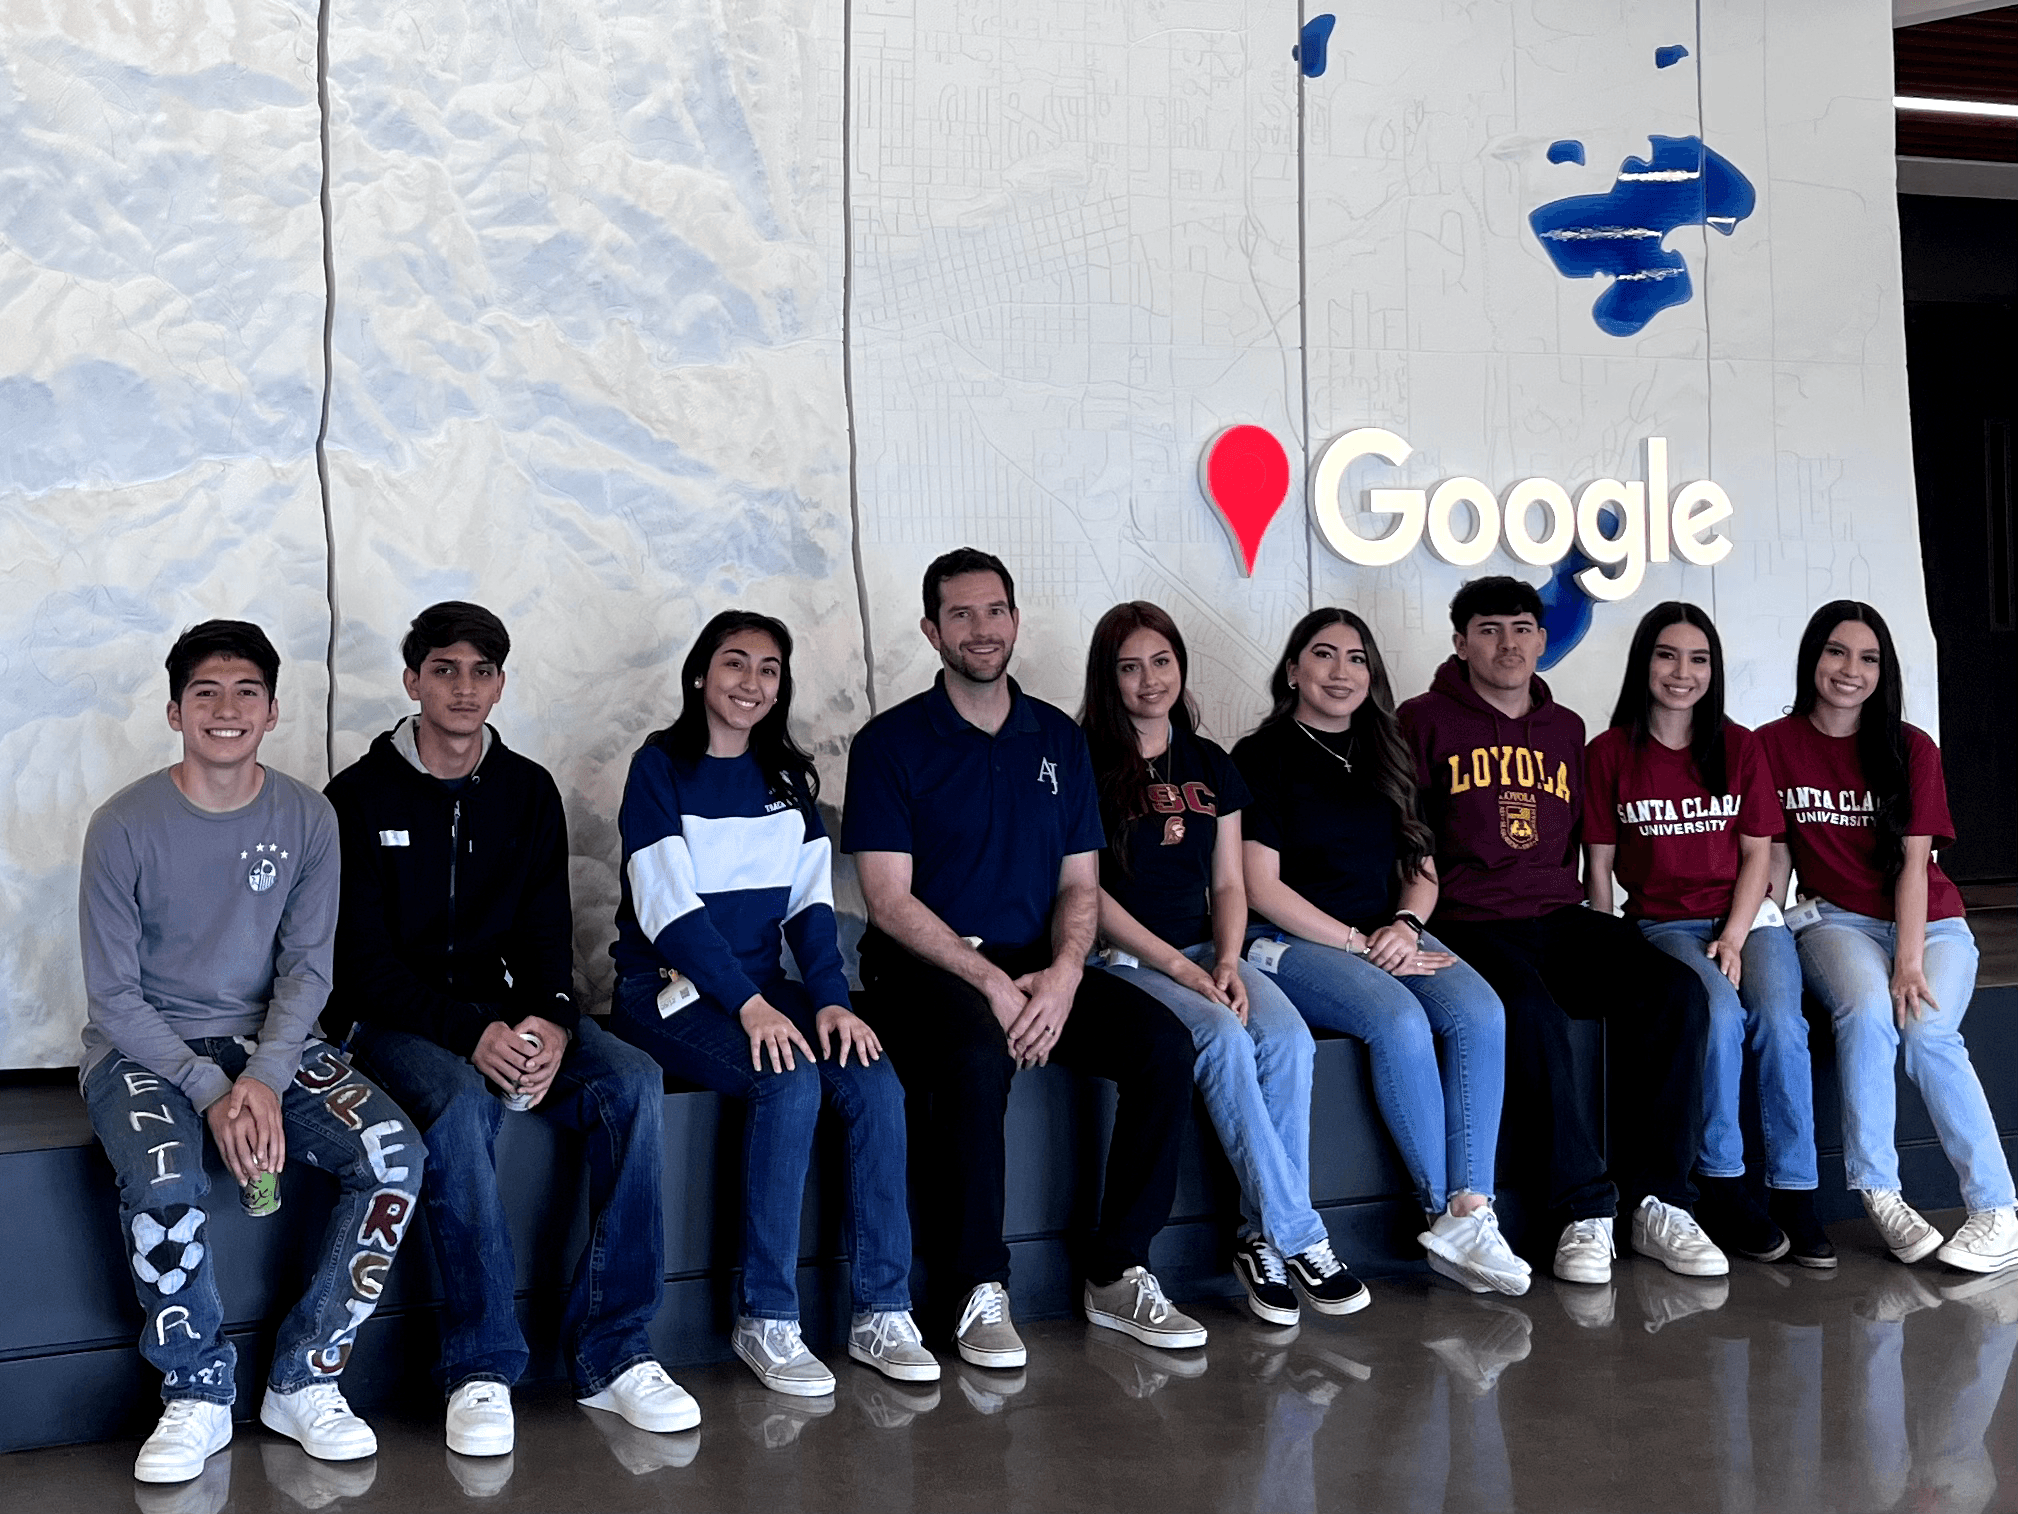 Exploring Innovation and Inspiration: A Journey to Google Campus with Arrupe Jesuit High School's Senior Students